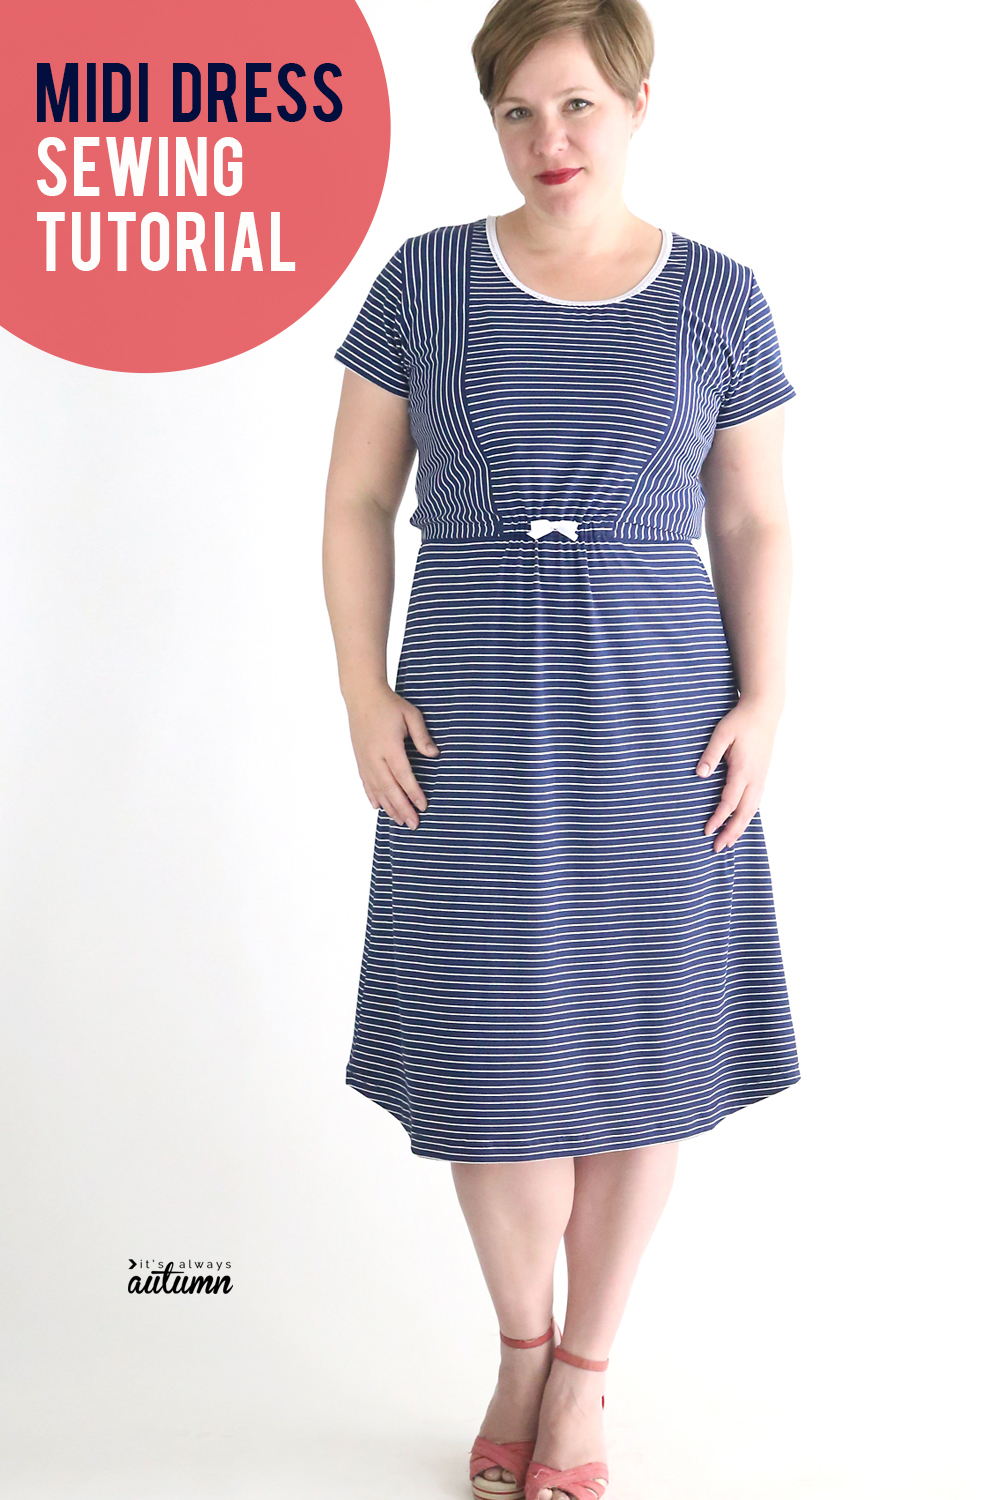 How to sew a cute midi dress using a free t-shirt pattern. Easy women's dress pattern and tutorial.